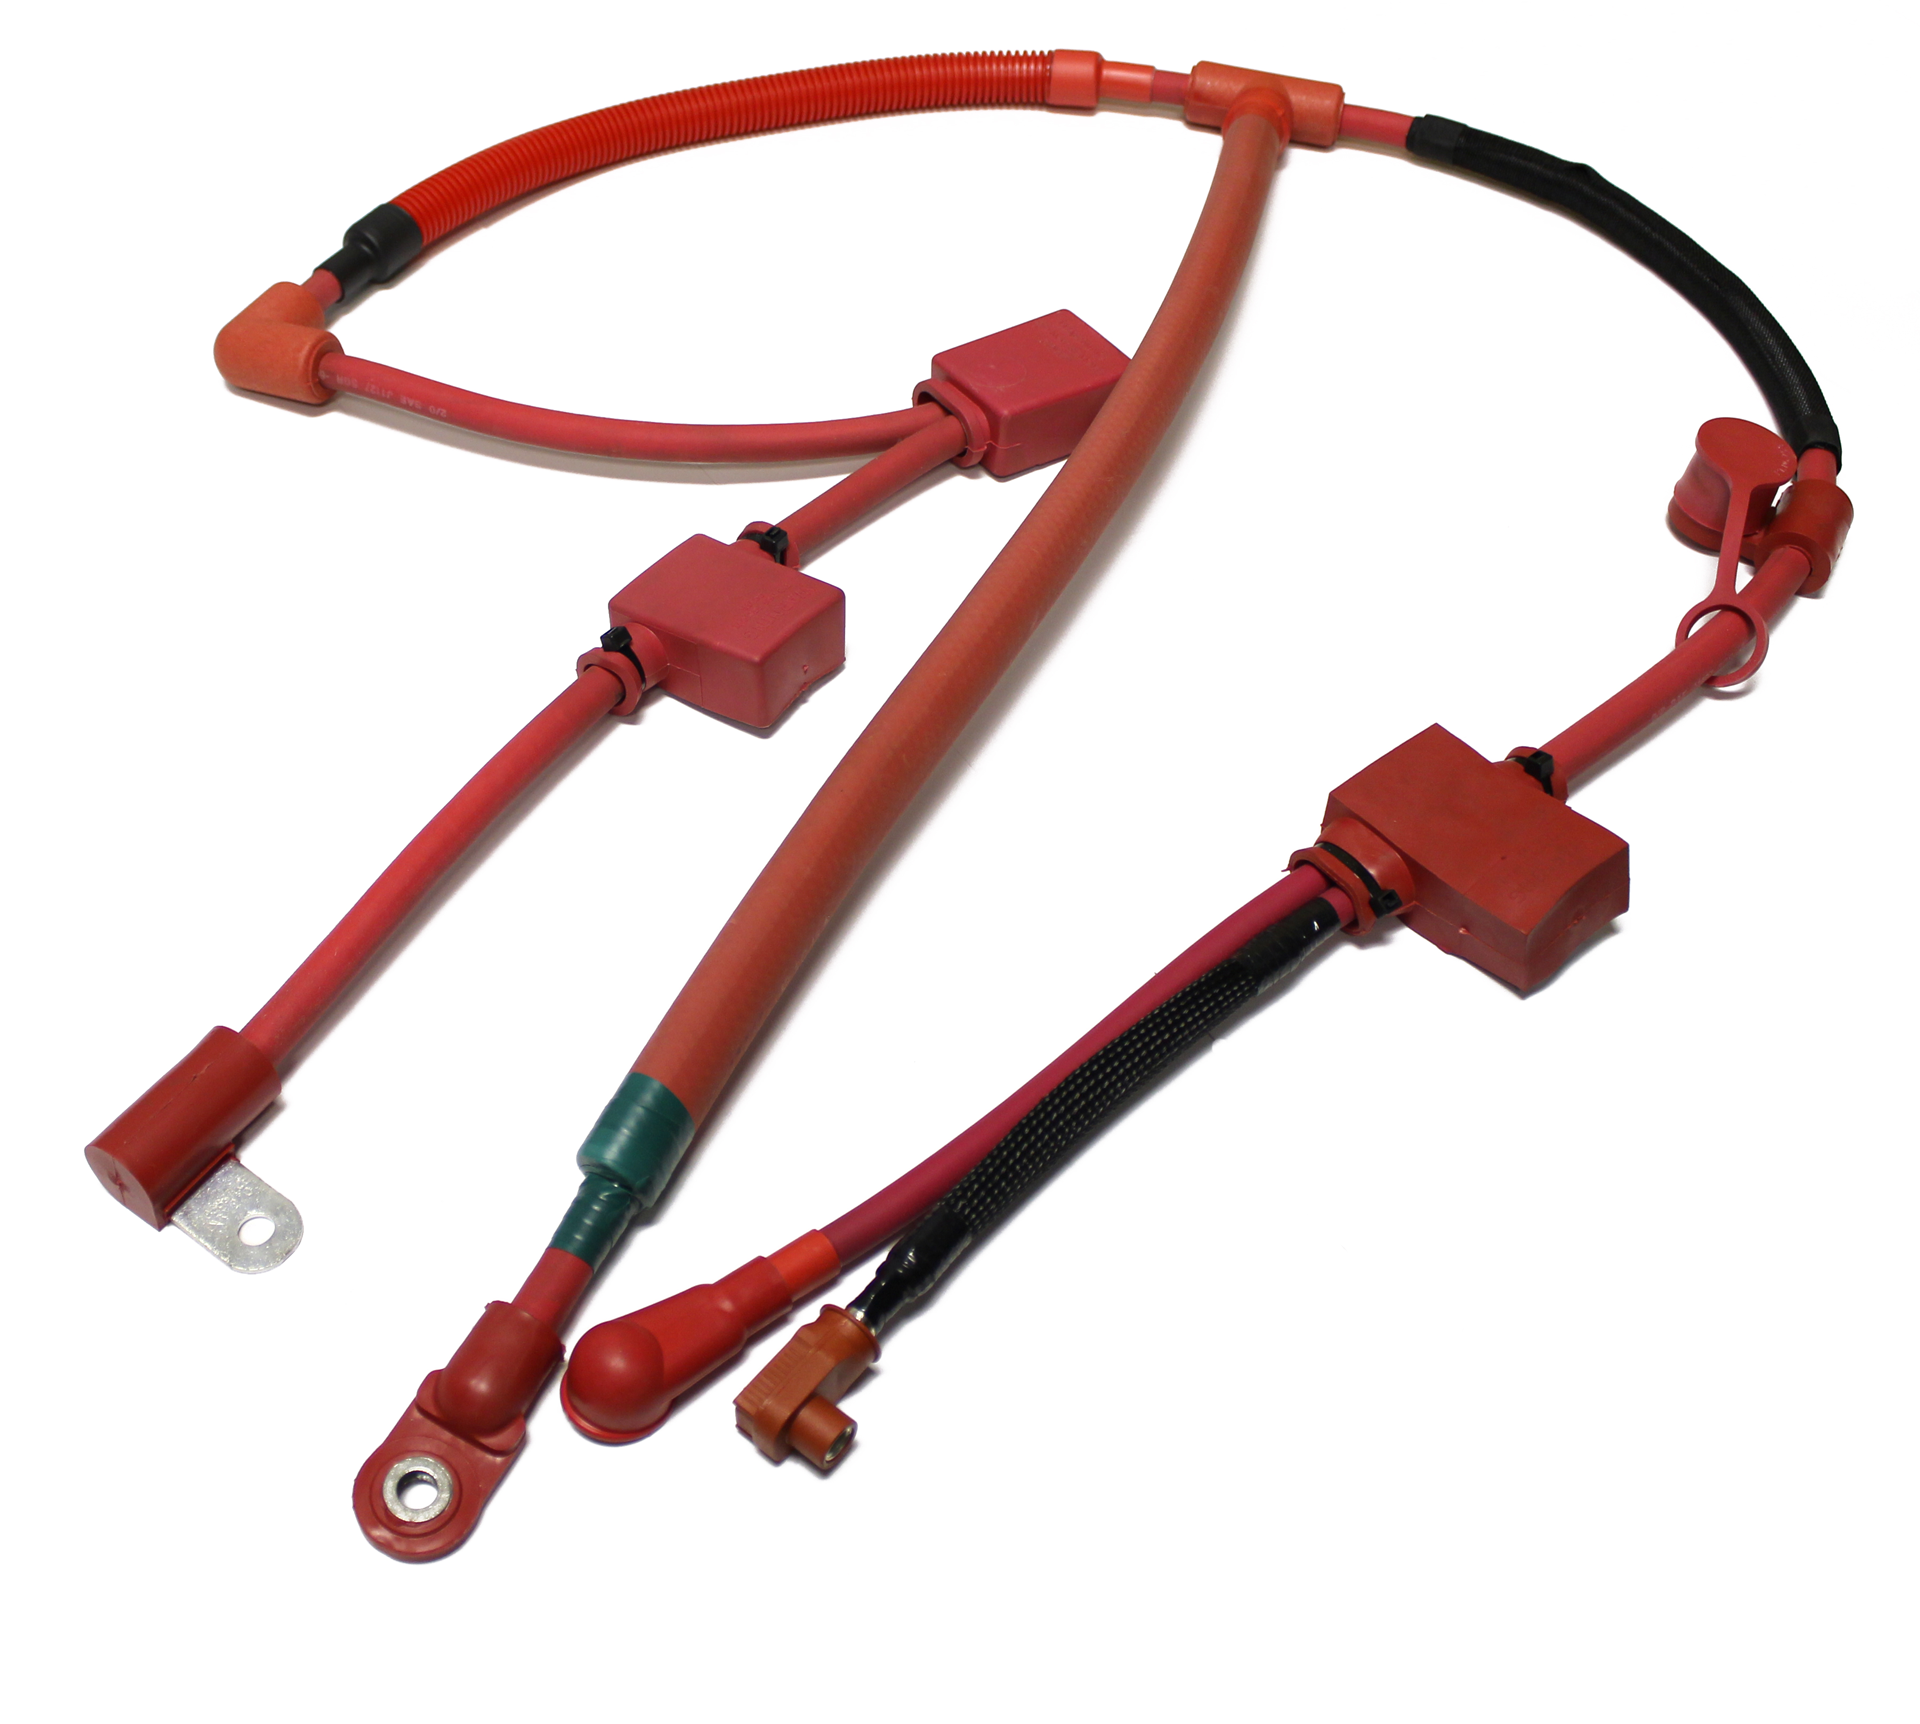 Battery cable. С320 Battery Cable. Craft Terminal Cabel мультиплексора 1511 Мах.